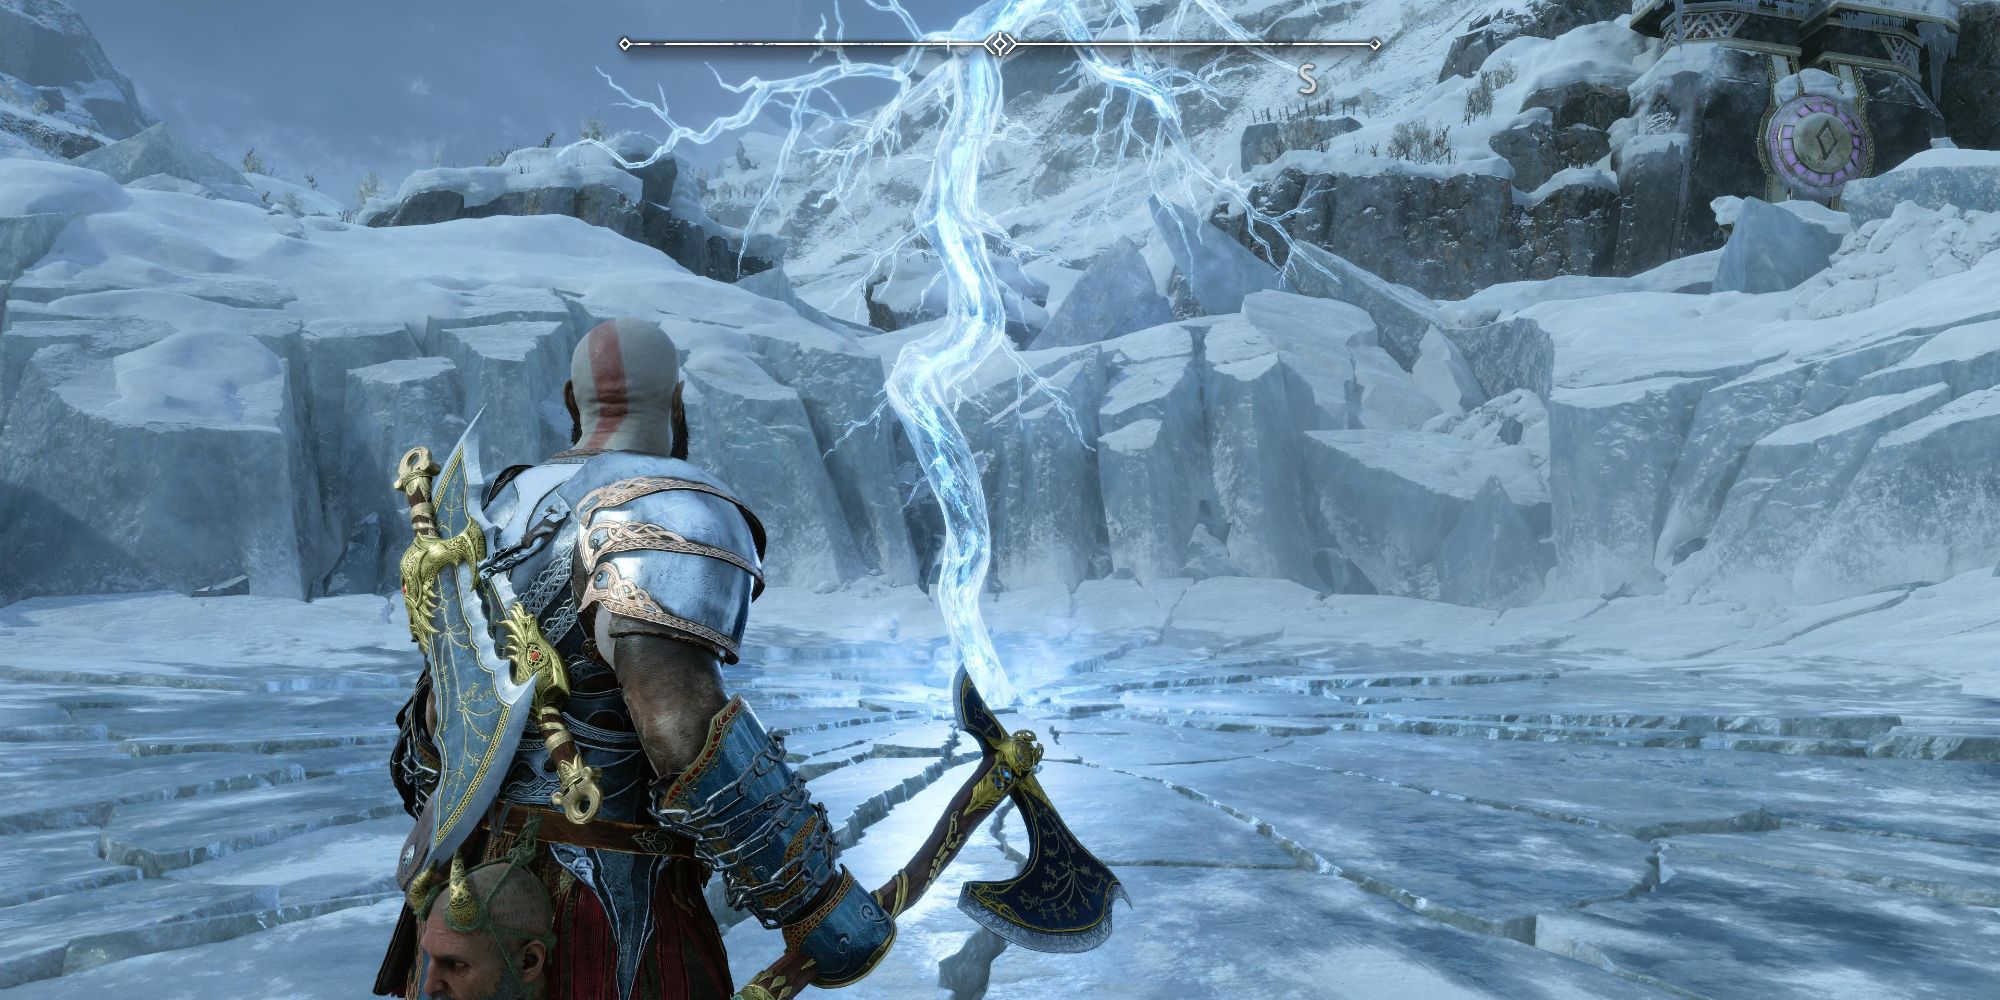 Kratos stands in the arena where you fight Thor earlier in the game.